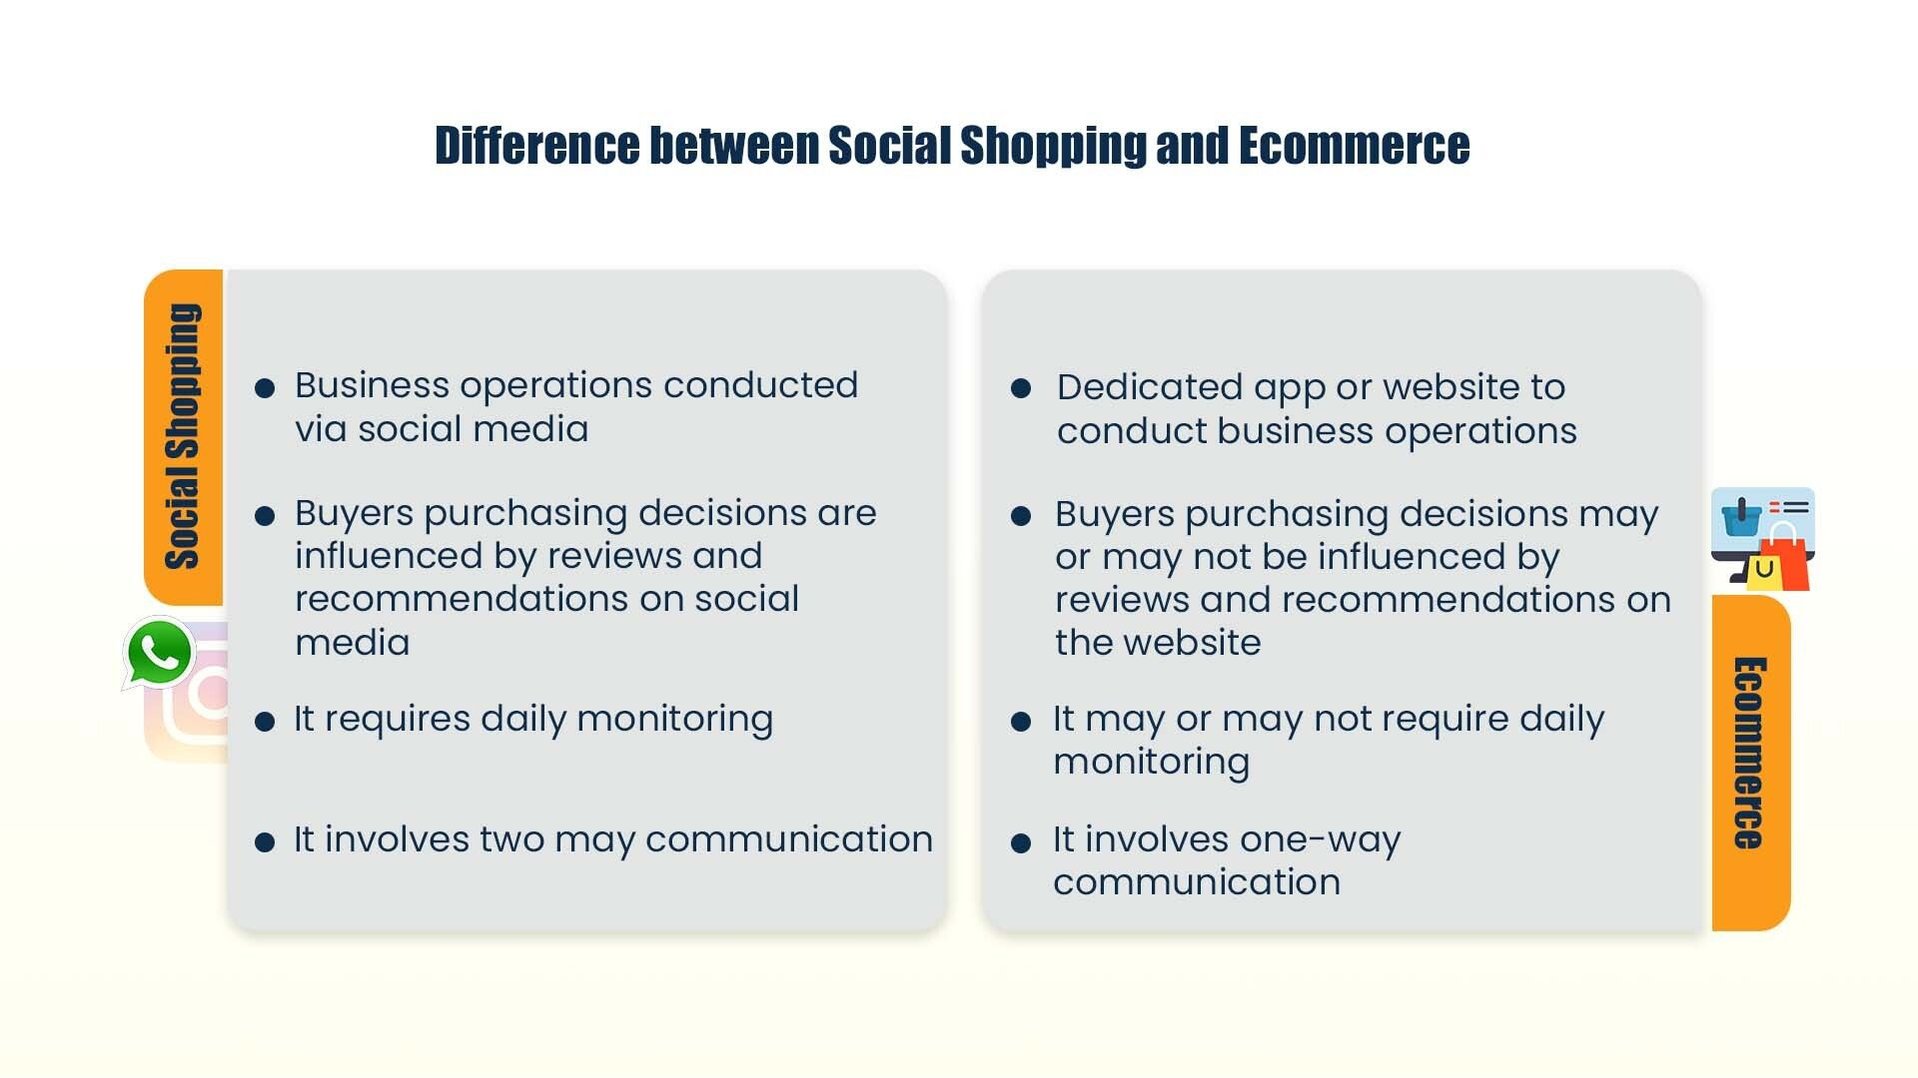 Difference between social shopping and ecommerce